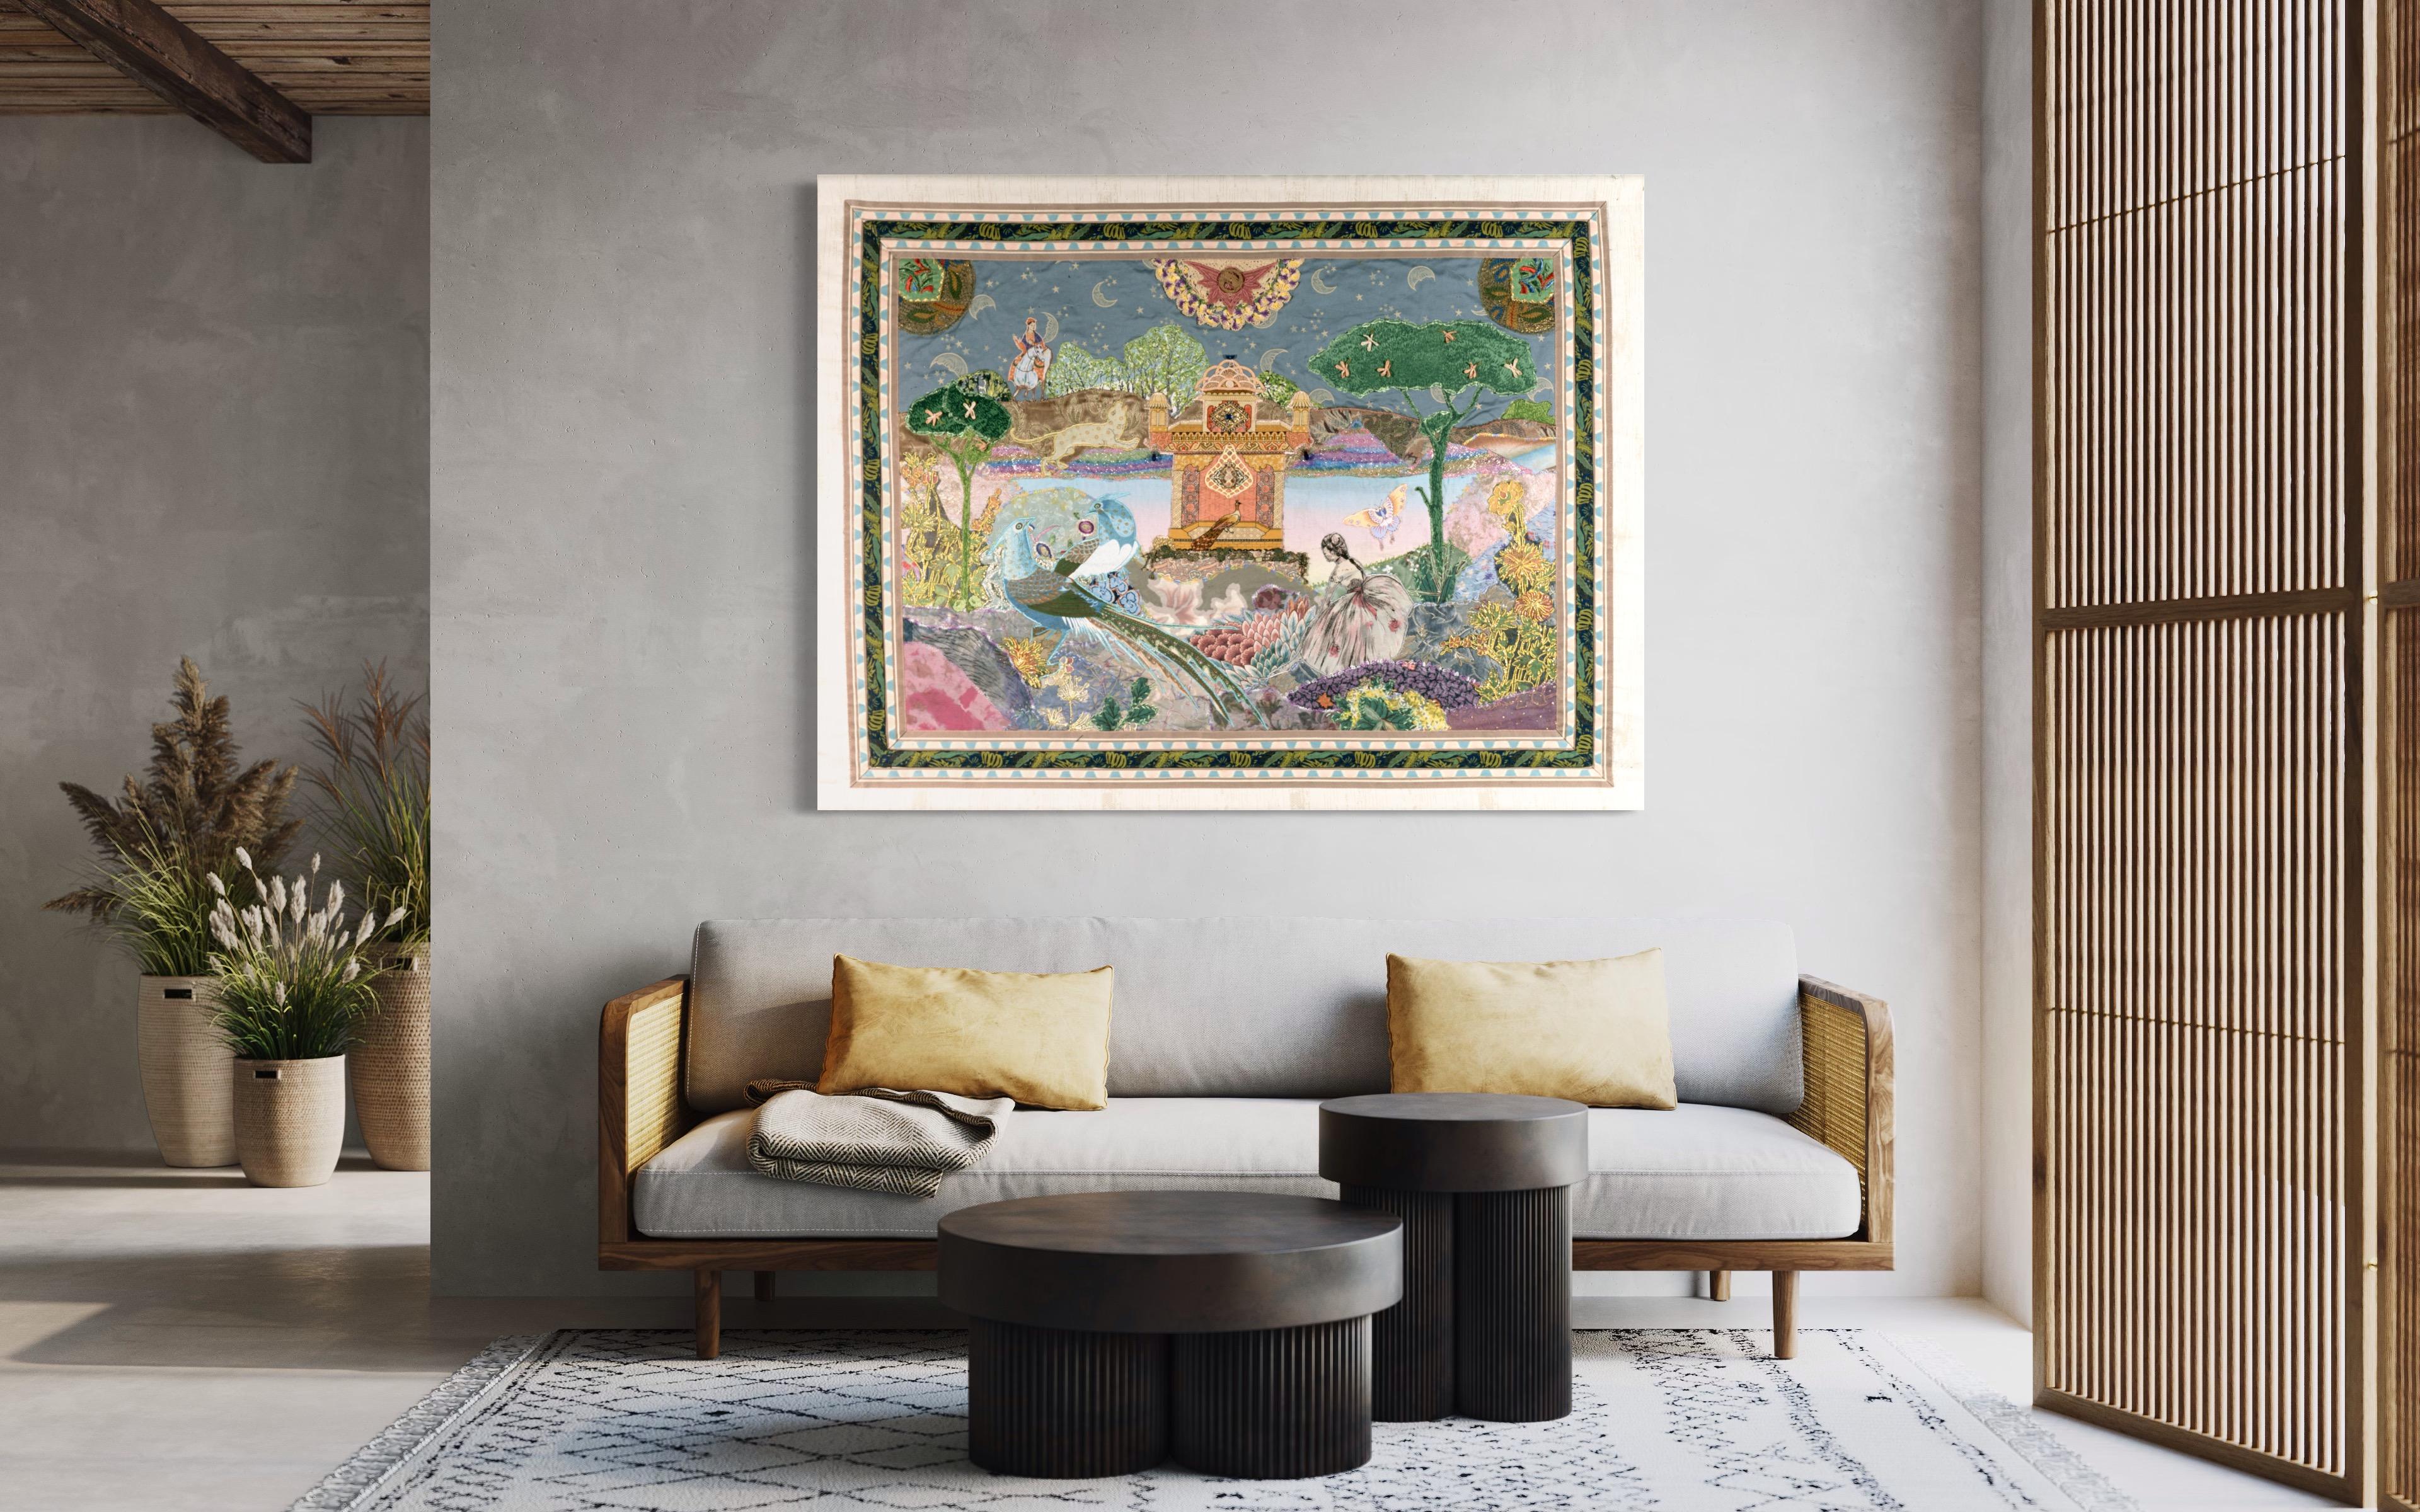 This whimsical, horizontal embellished tapestry measures 40 inches tall and 52 inches wide. It is a collage of hand painted and dyed fabrics, vintage textiles, trimmings, and antique bead embellishments. This textural tapestry comes with two wooden